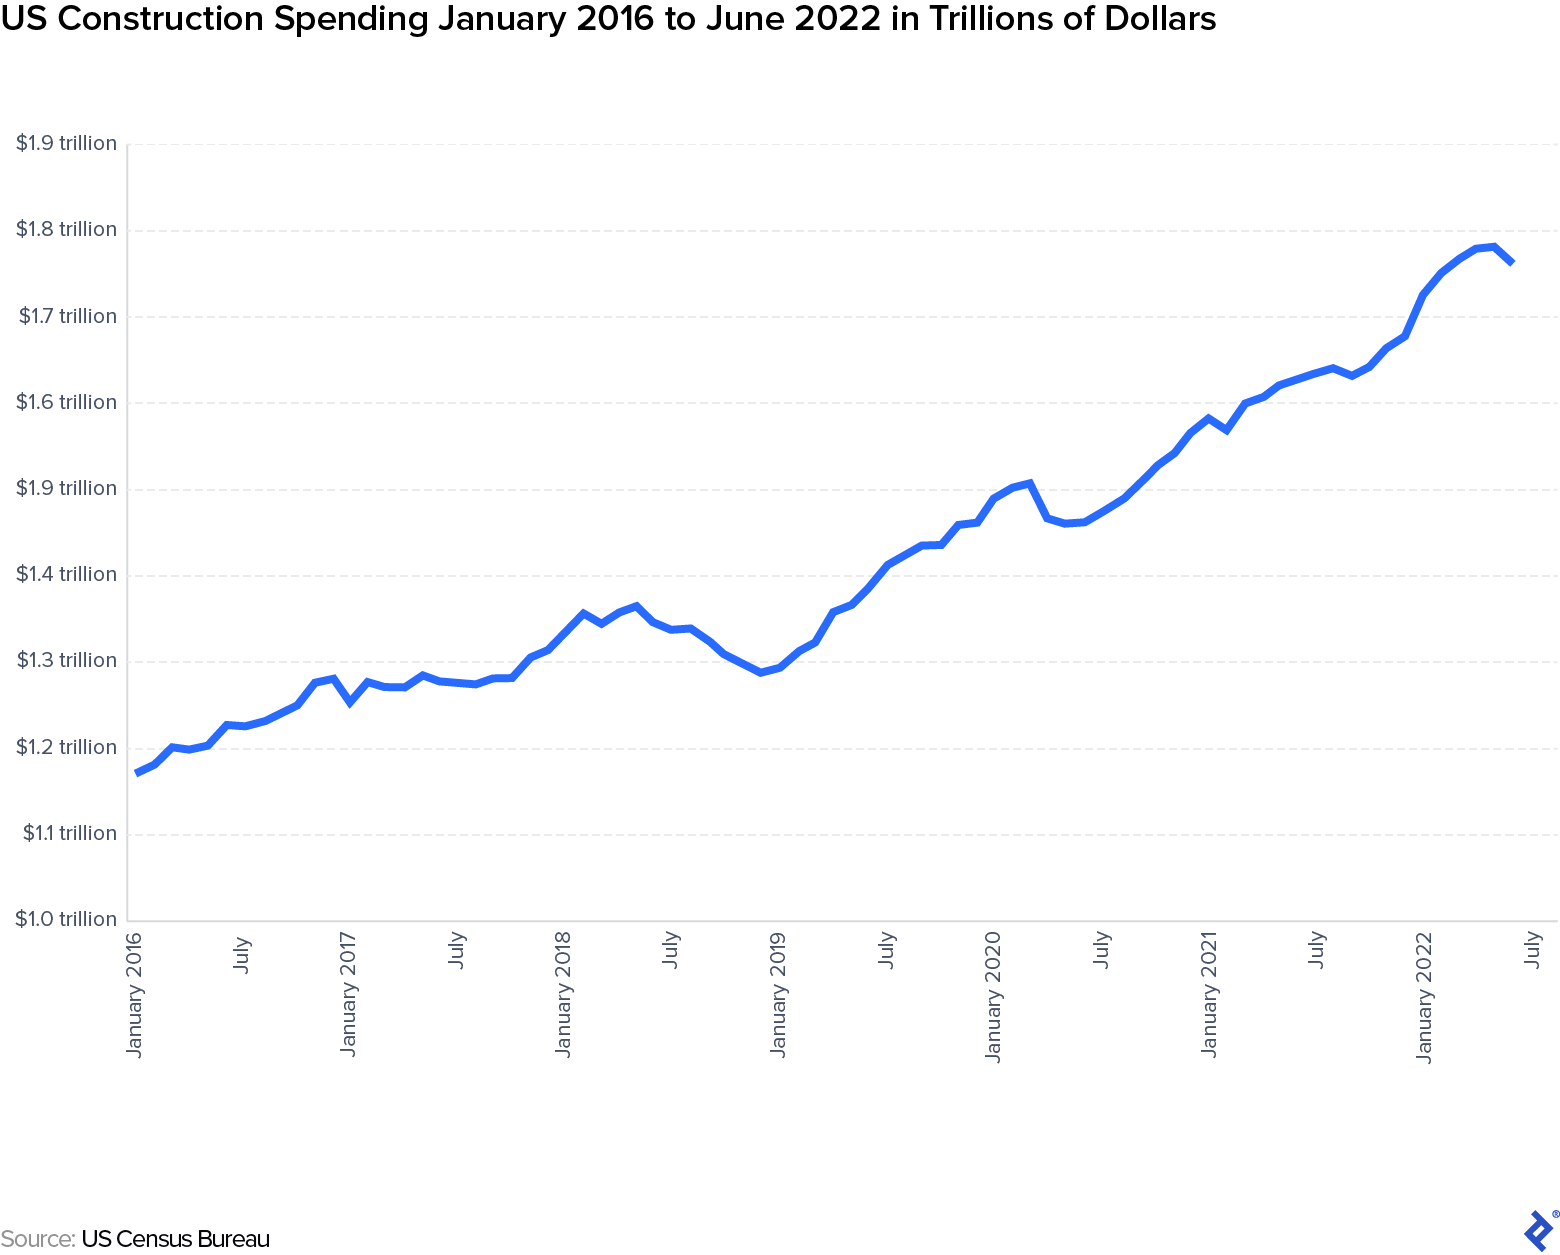 This line graph shows a marked rise in US construction spending from about $1.2 trillion in January 2016, to nearly $1.8 trillion by June 2022. 